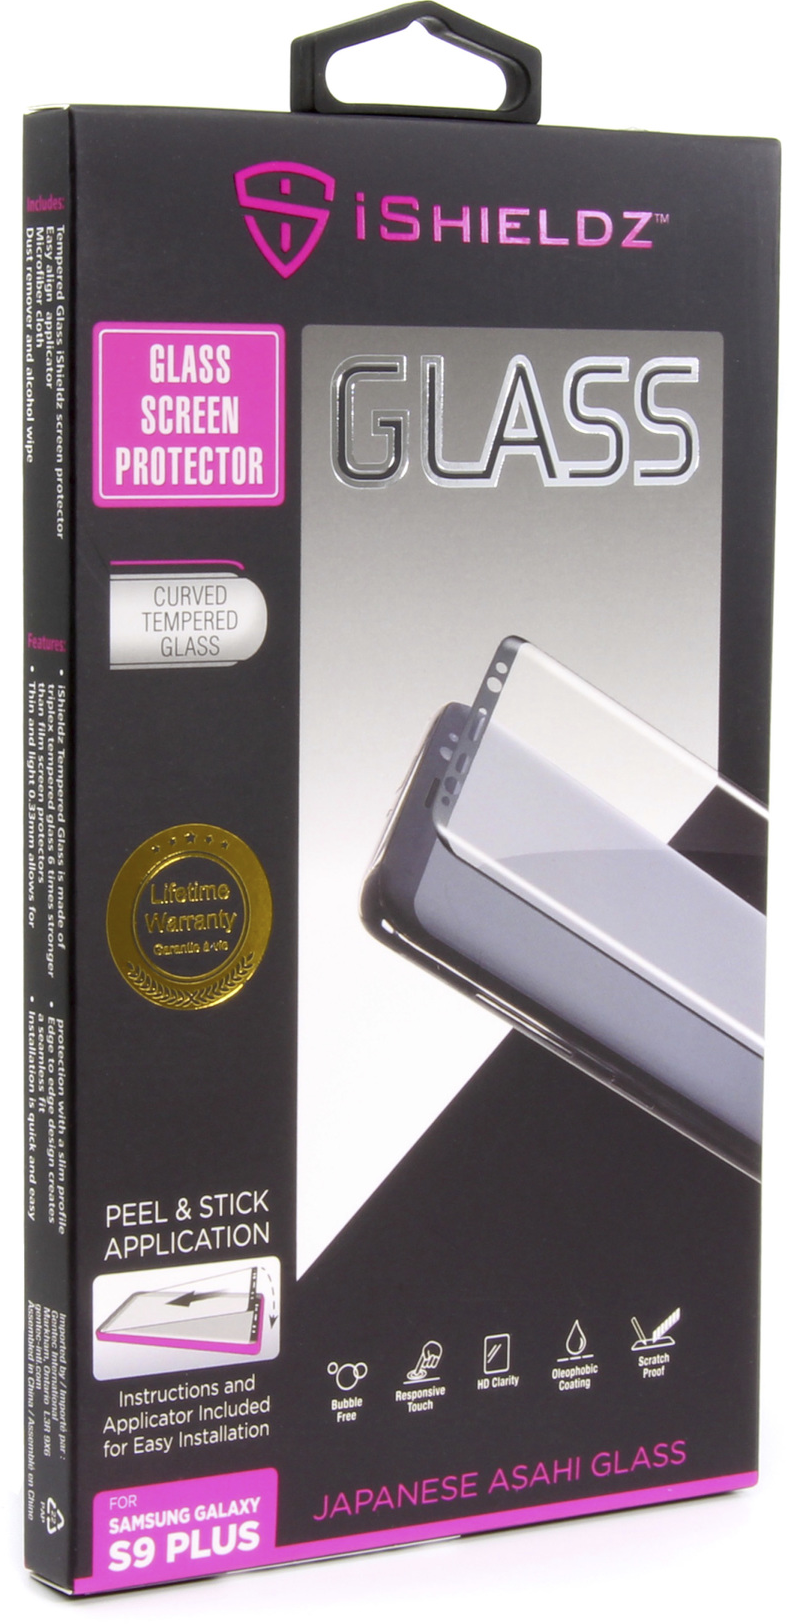 Galaxy S8 Plus Curved Tempered Glass Screen Protector With Applicator